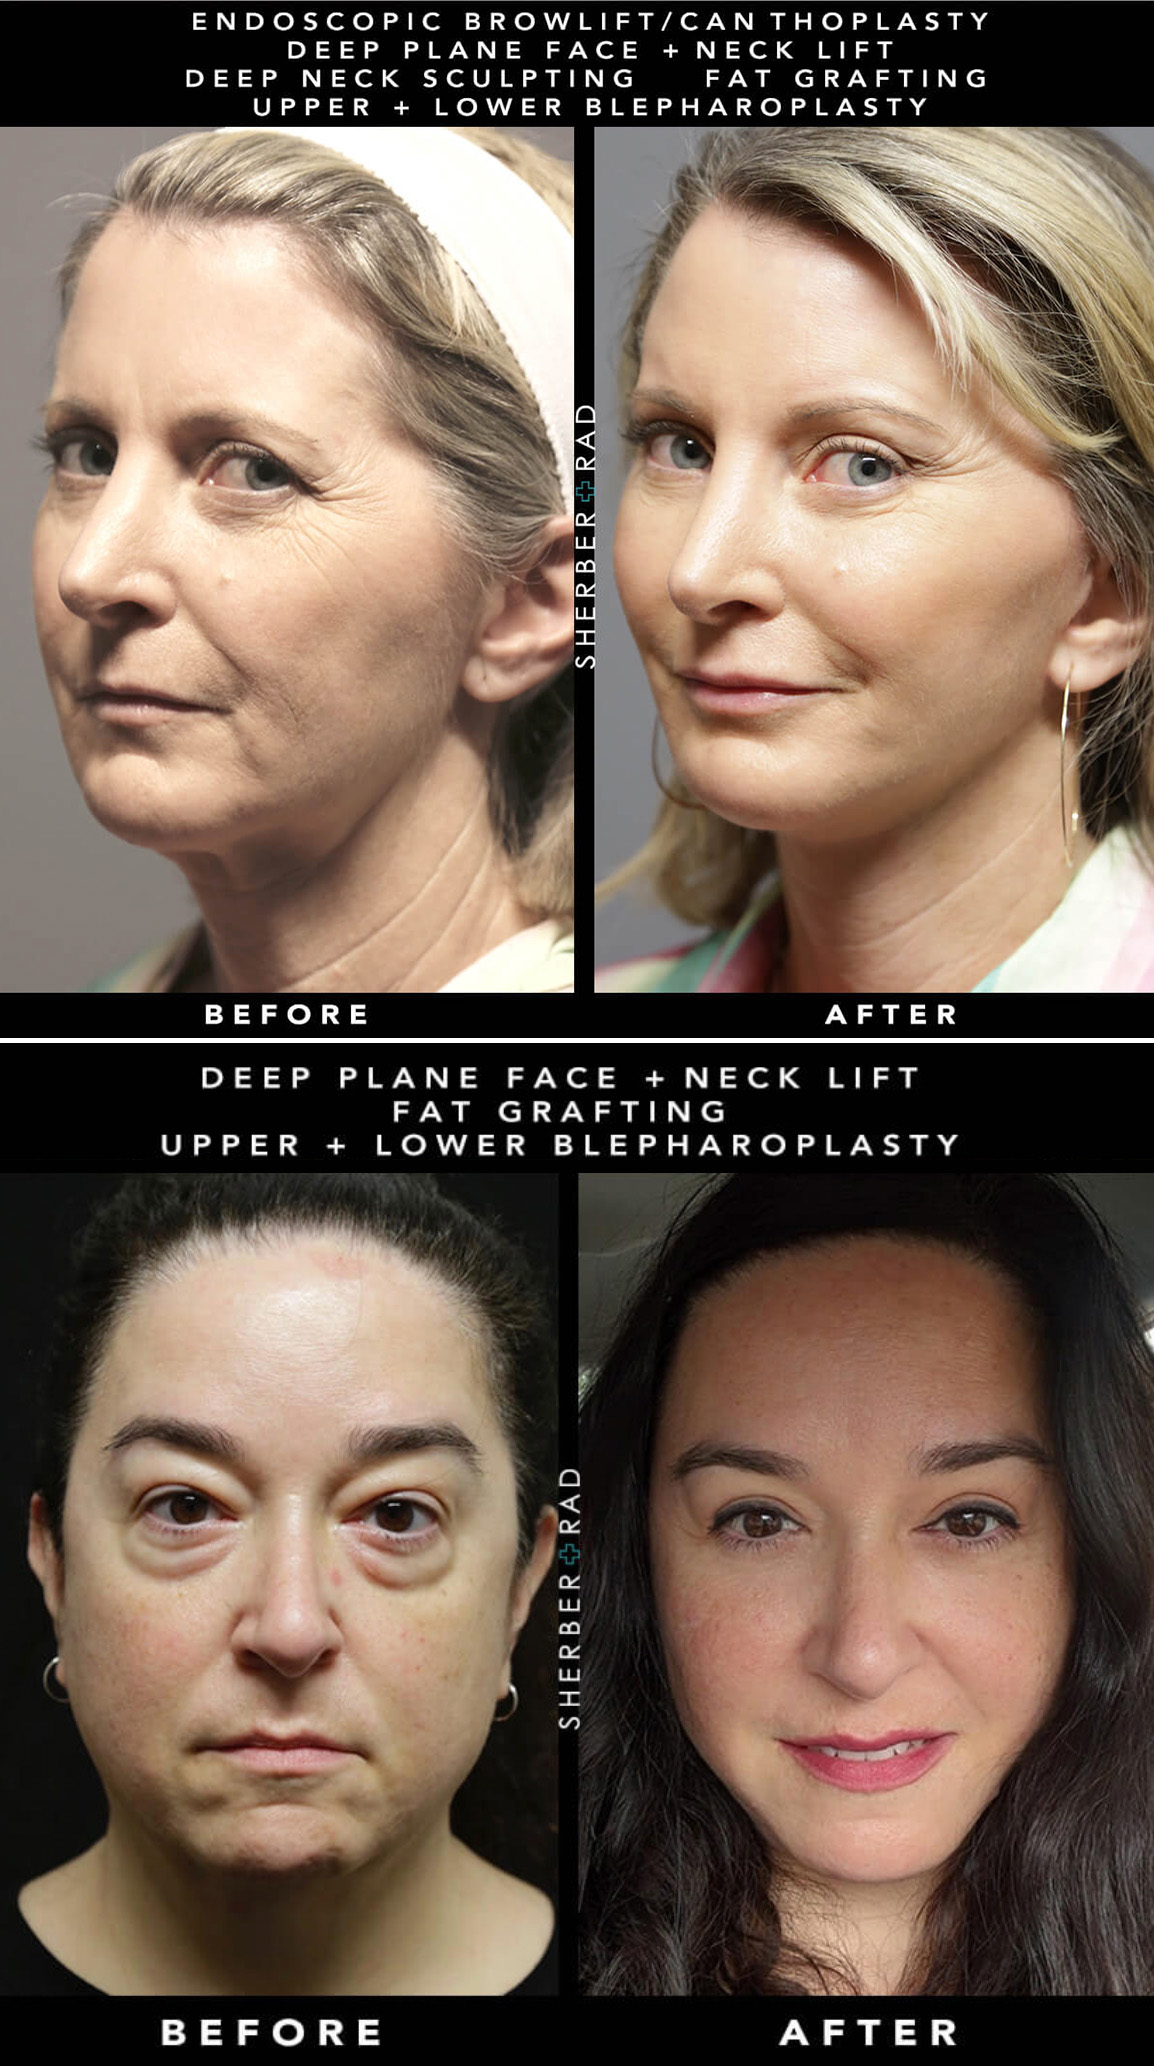 Facelift (Rhytidectomy): What Is It, Recovery & What to Expect